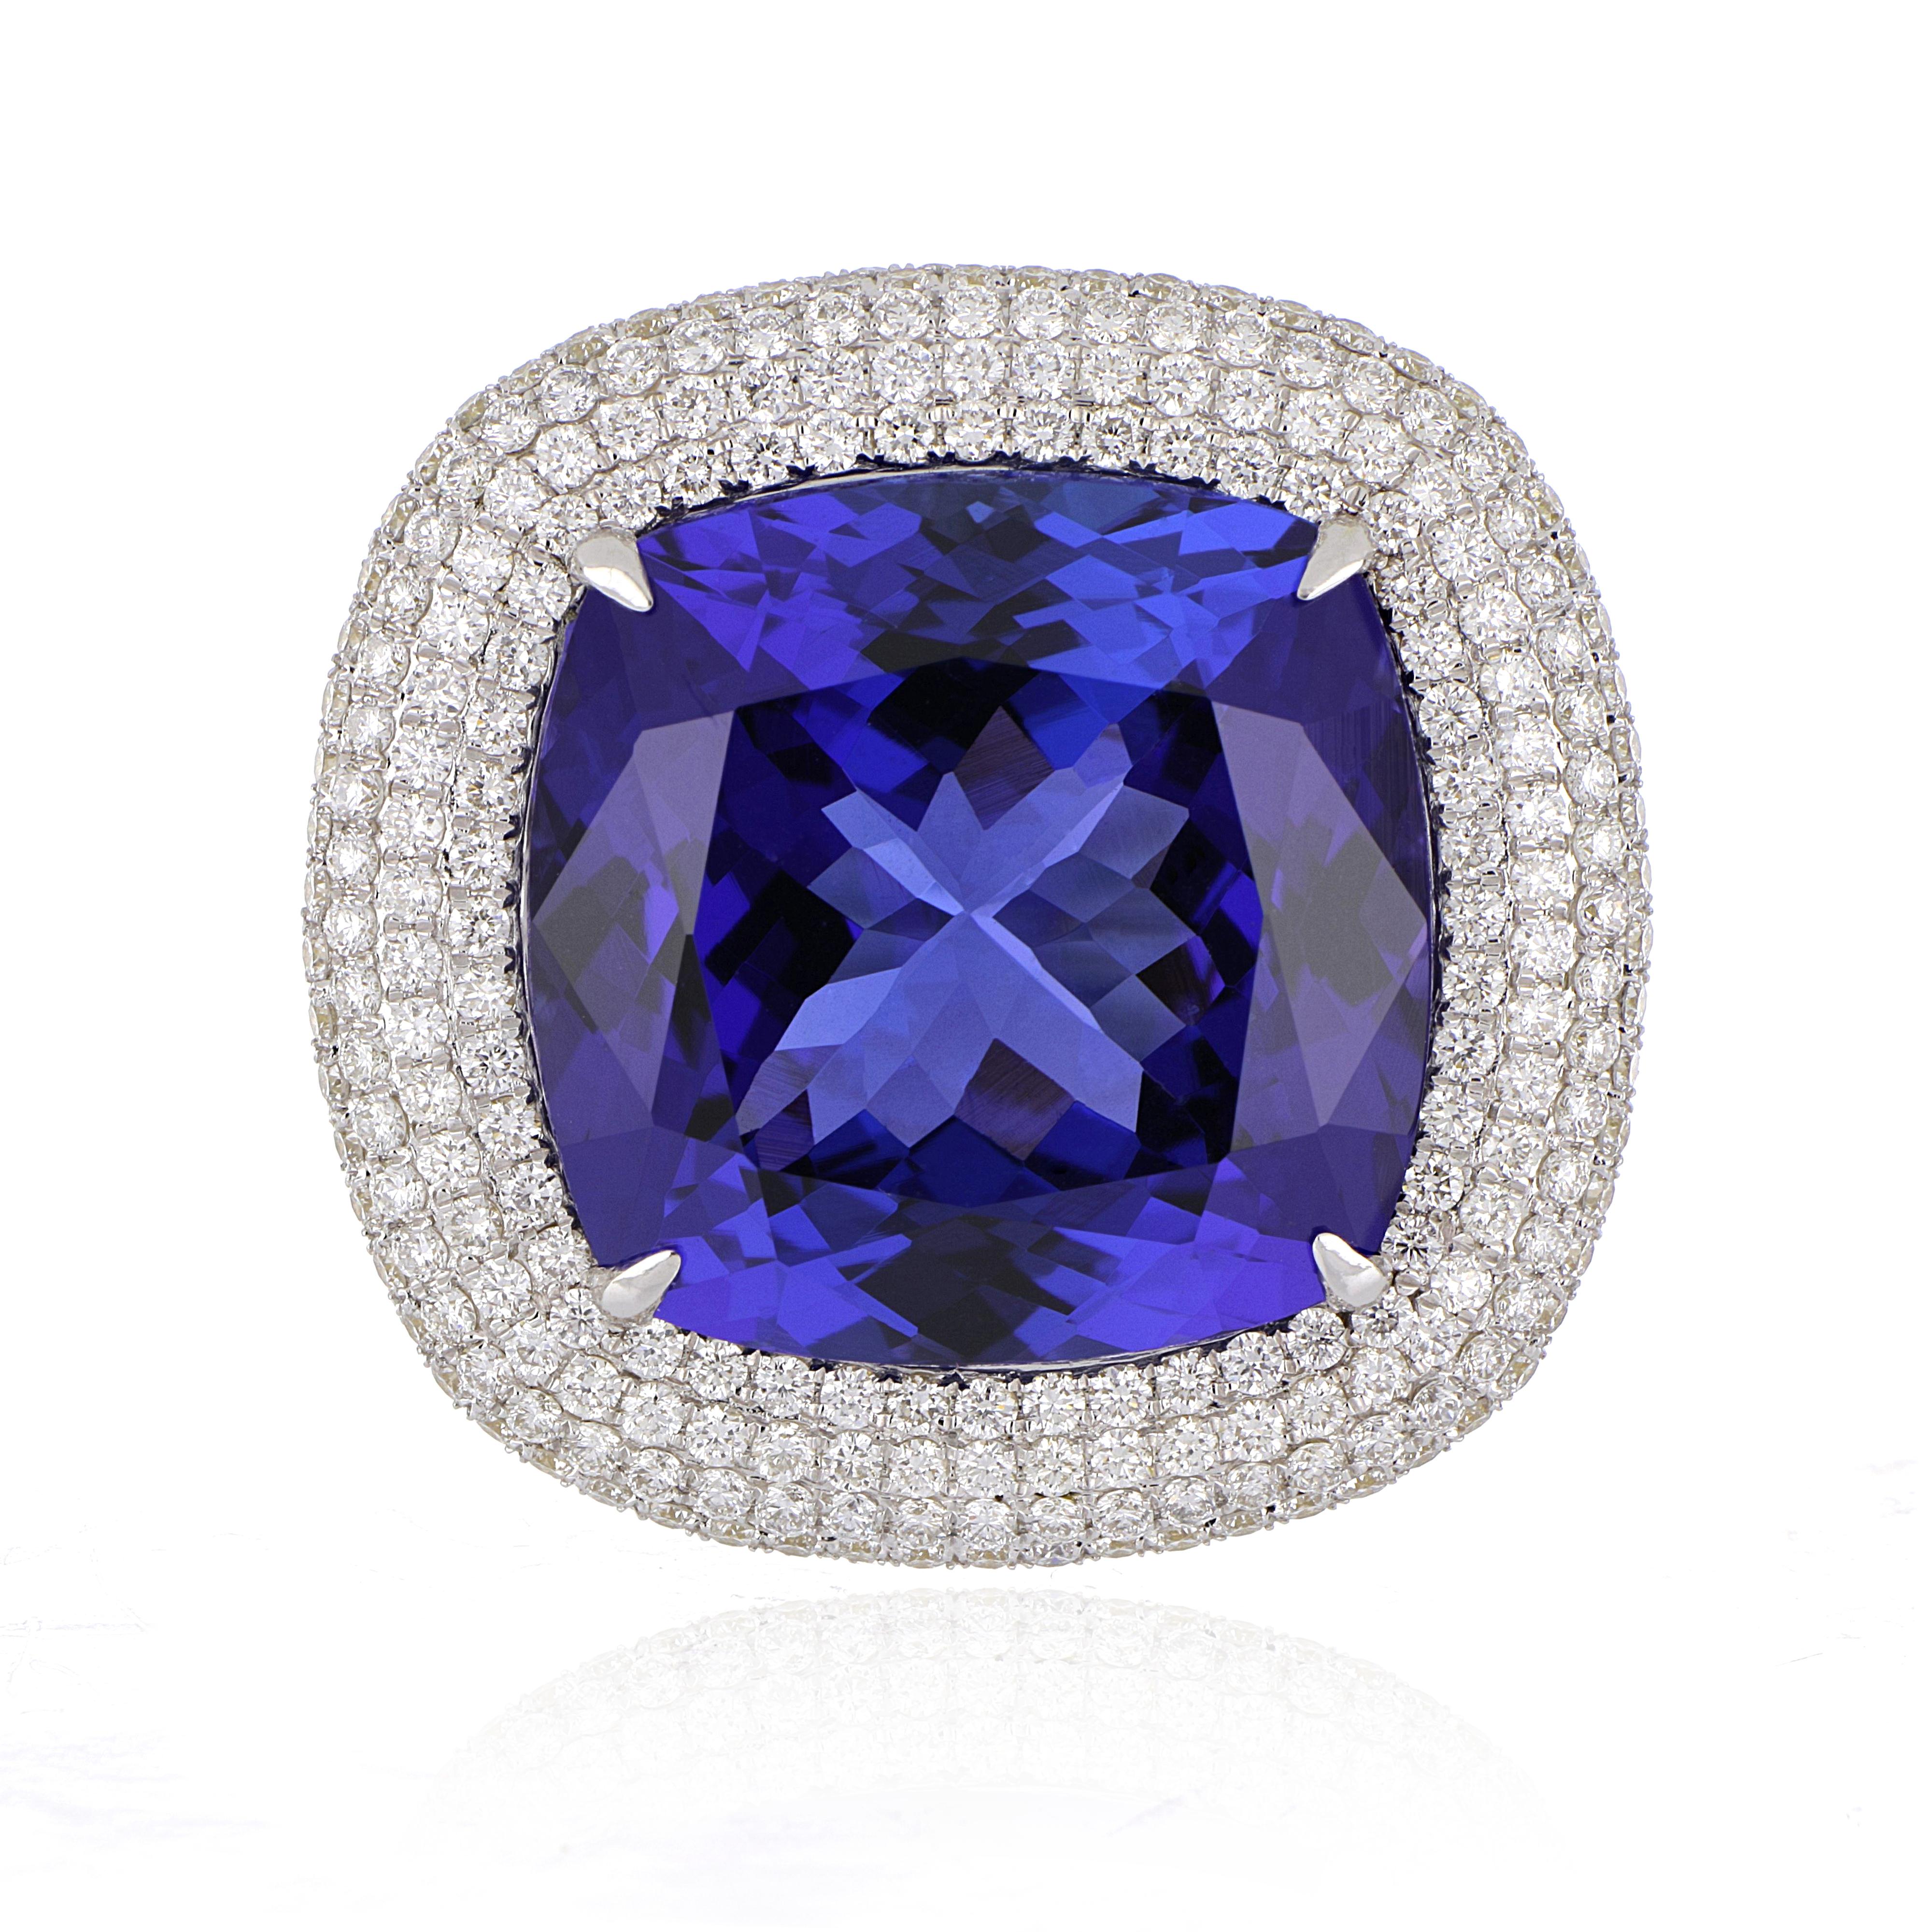 Elegant and exquisitely detailed 18K Ring, centre set with 20.41 Ct Tanzanite, surrounded by and enhanced on shank with micro pave Diamonds, weighing approx. 1.66 total carat weight. Beautifully Hand crafted in 18 Karat white Gold.

Stone Size: